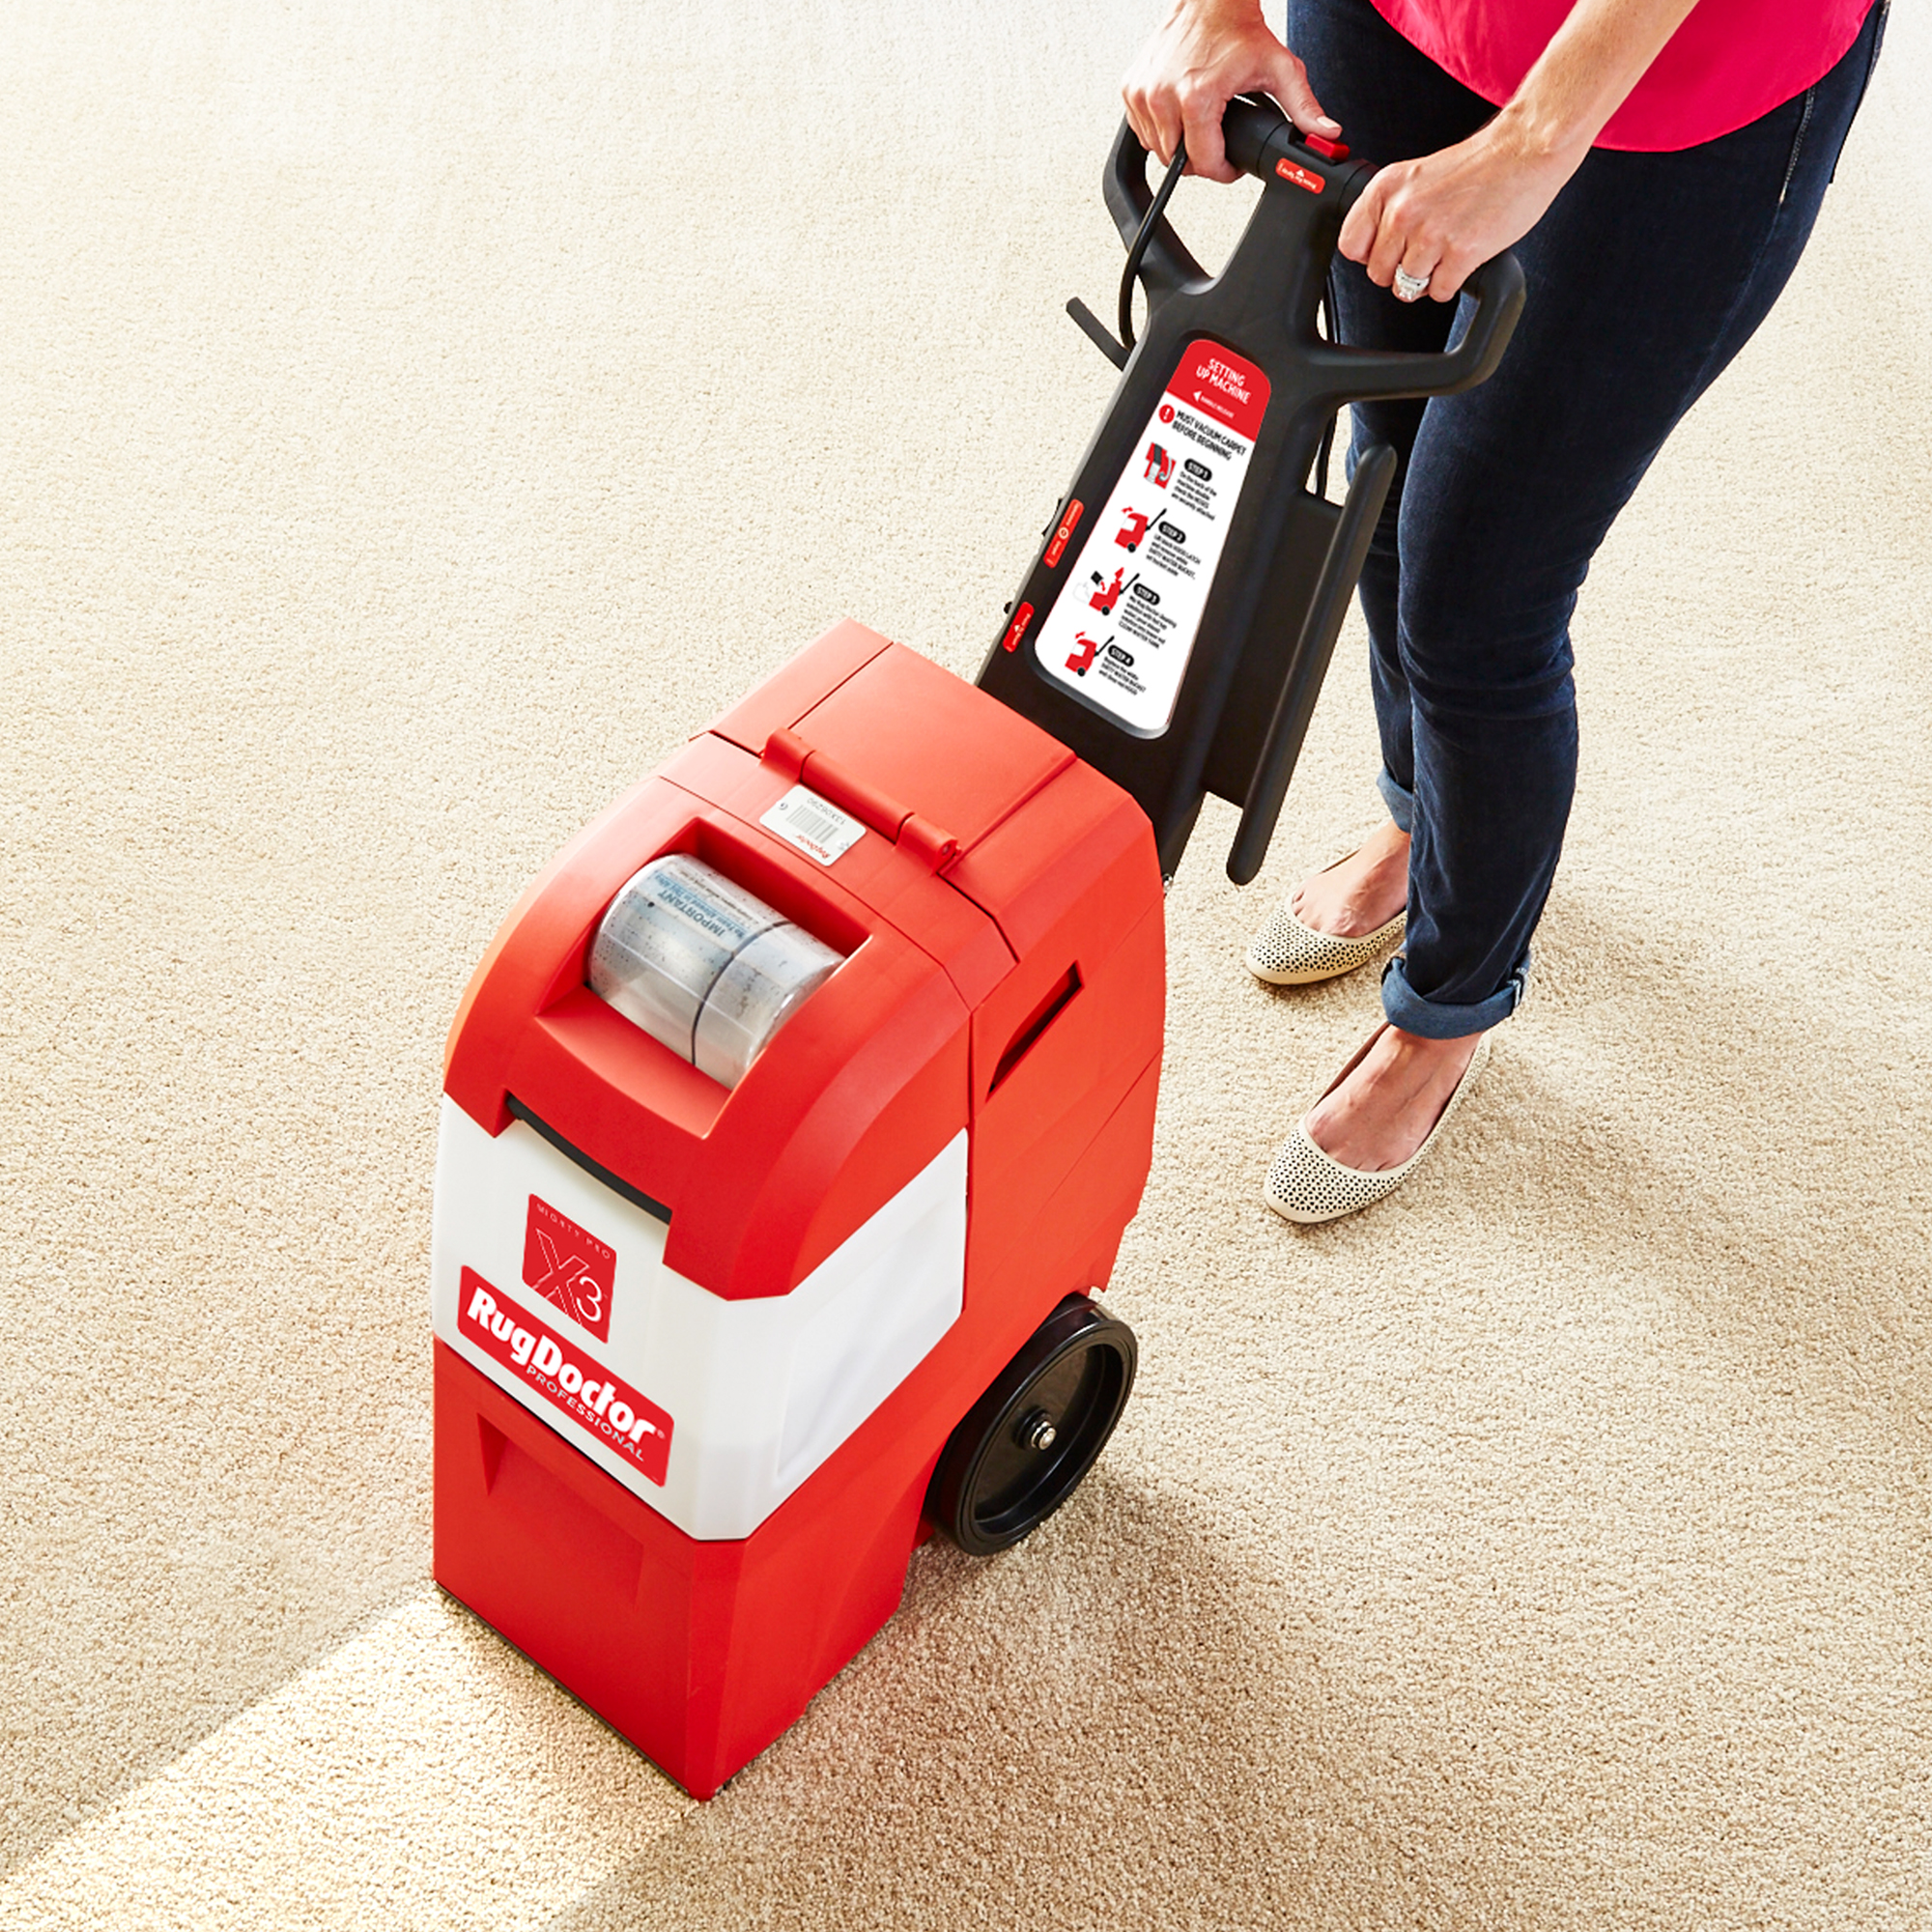 Rug Doctor Mighty Pro X3 Commercial Carpet Cleaner - Large Red Pet Pack - image 3 of 7